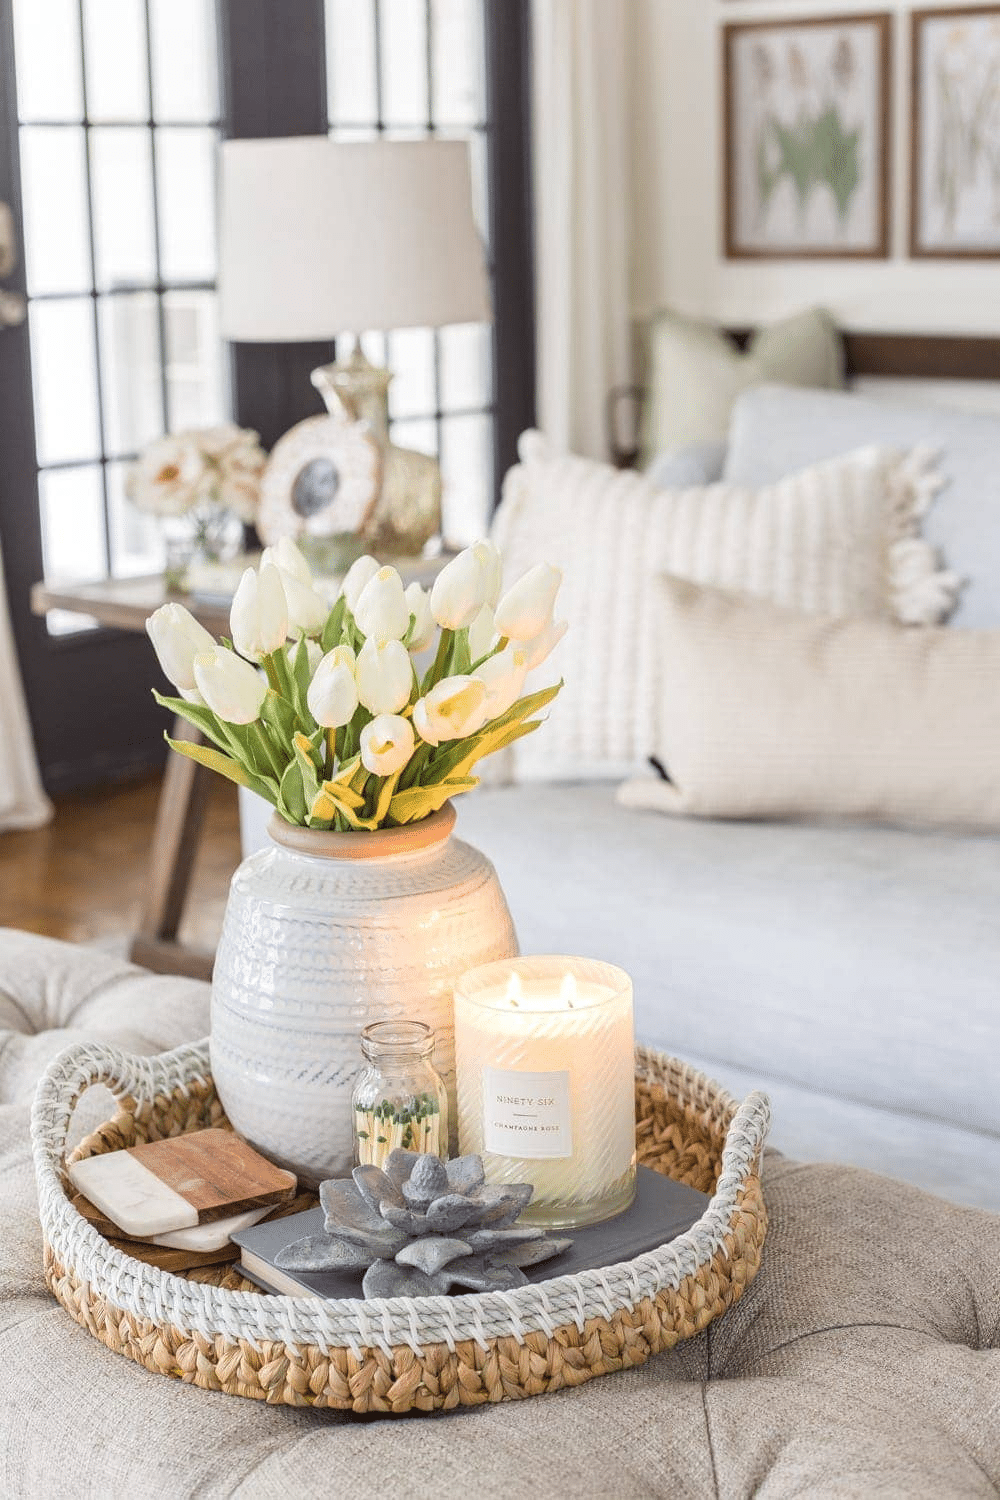 Time to update your coffee table decor